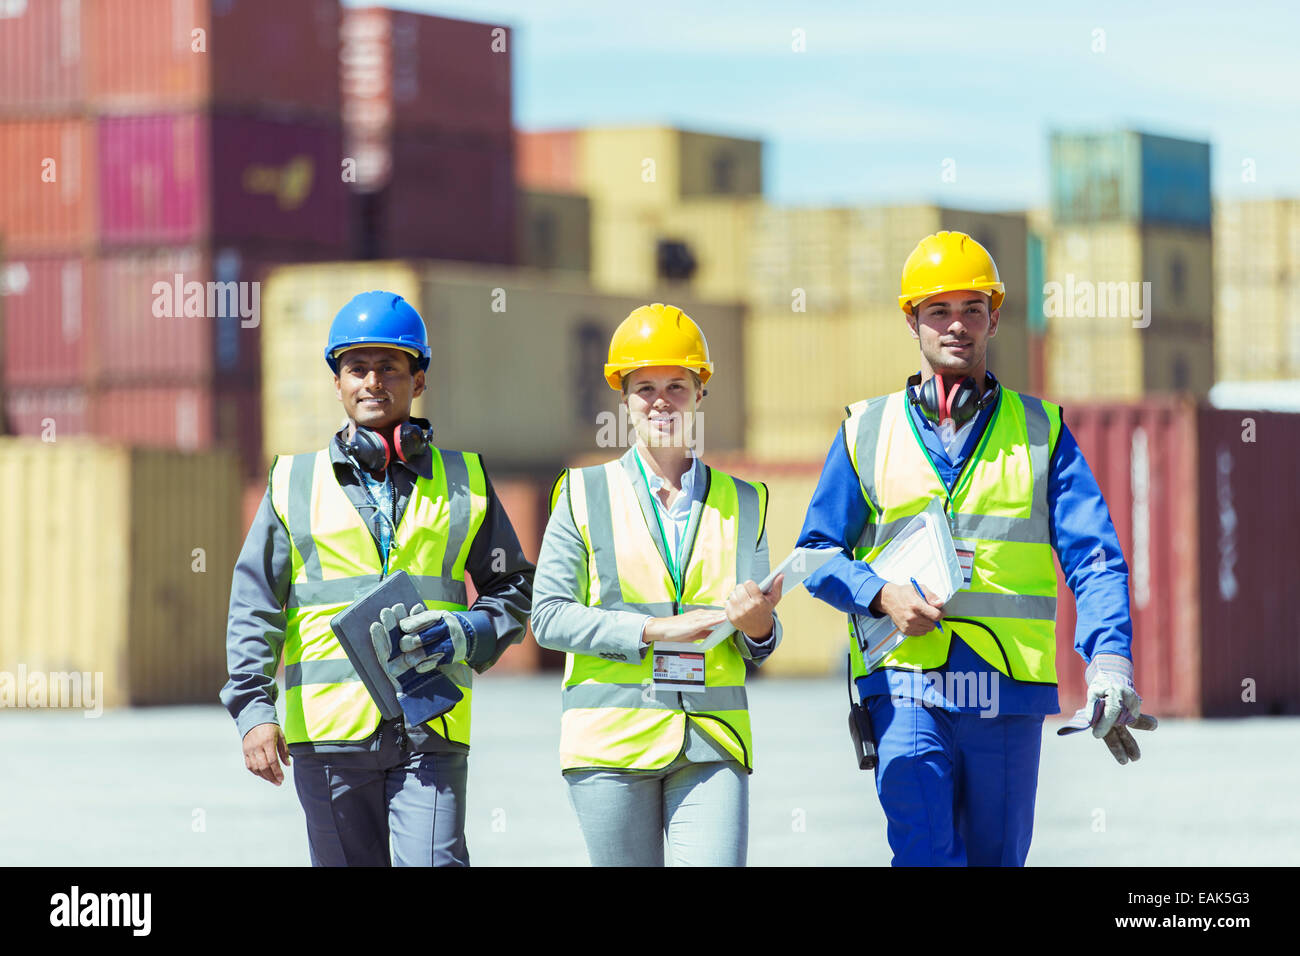 Businesswoman and workers walking near cargo containers Stock Photo